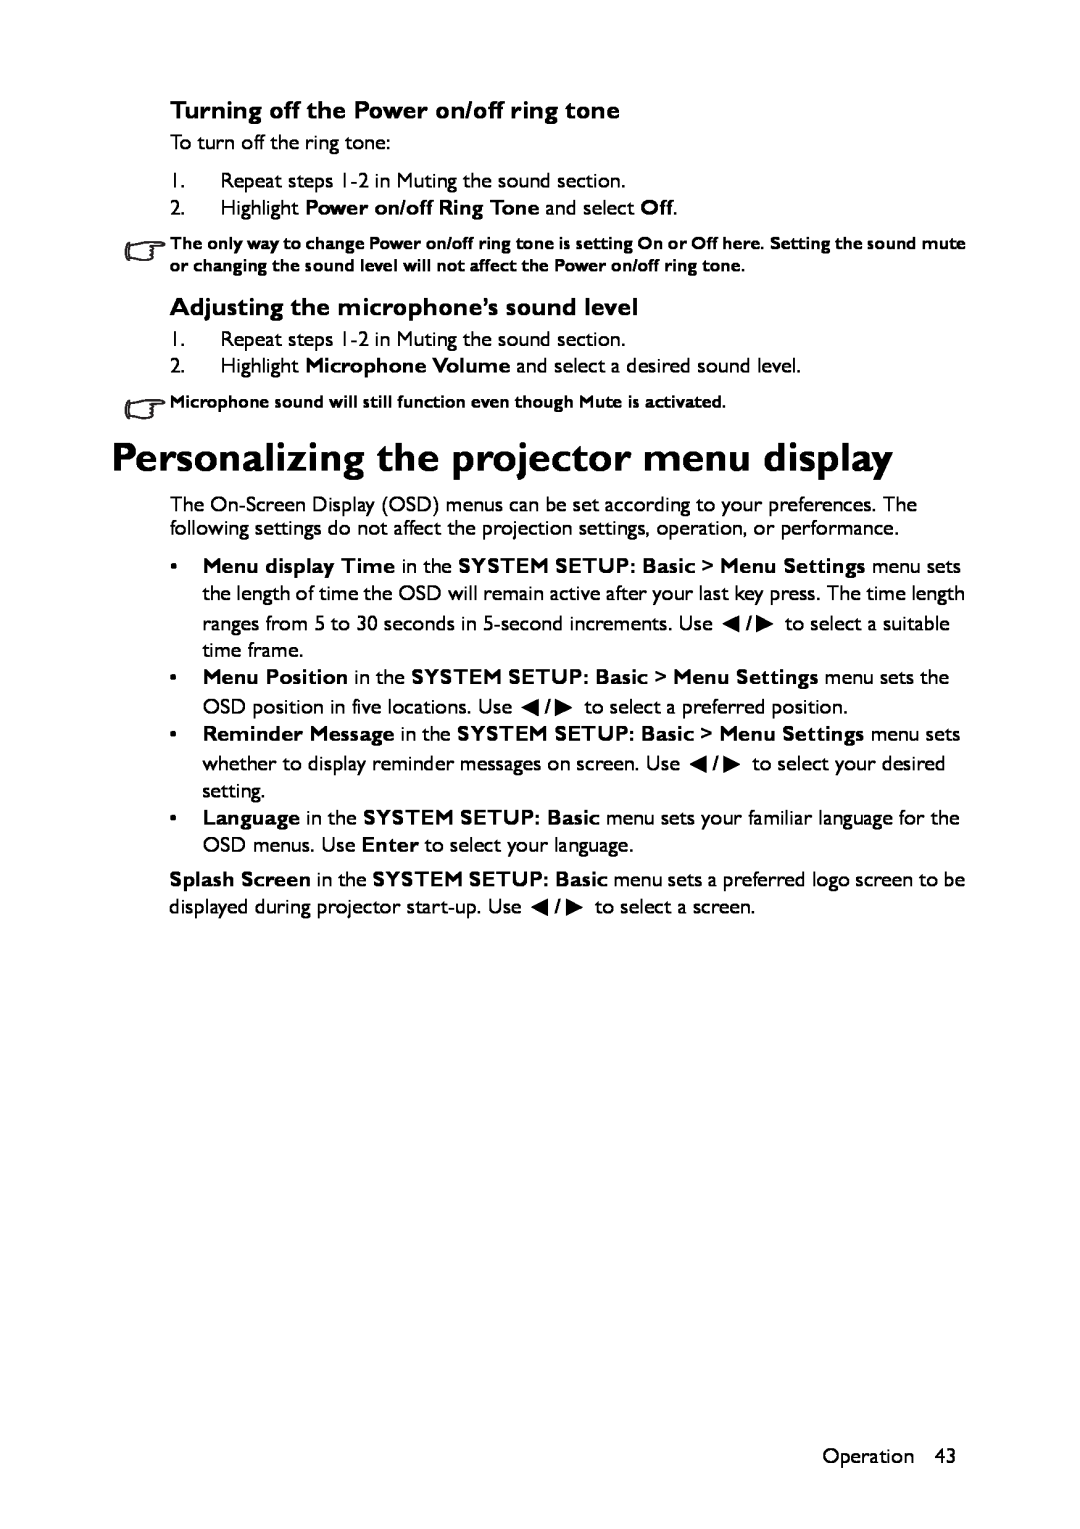 BenQ MX661 user manual Personalizing the projector menu display, Turning off the Power on/off ring tone 